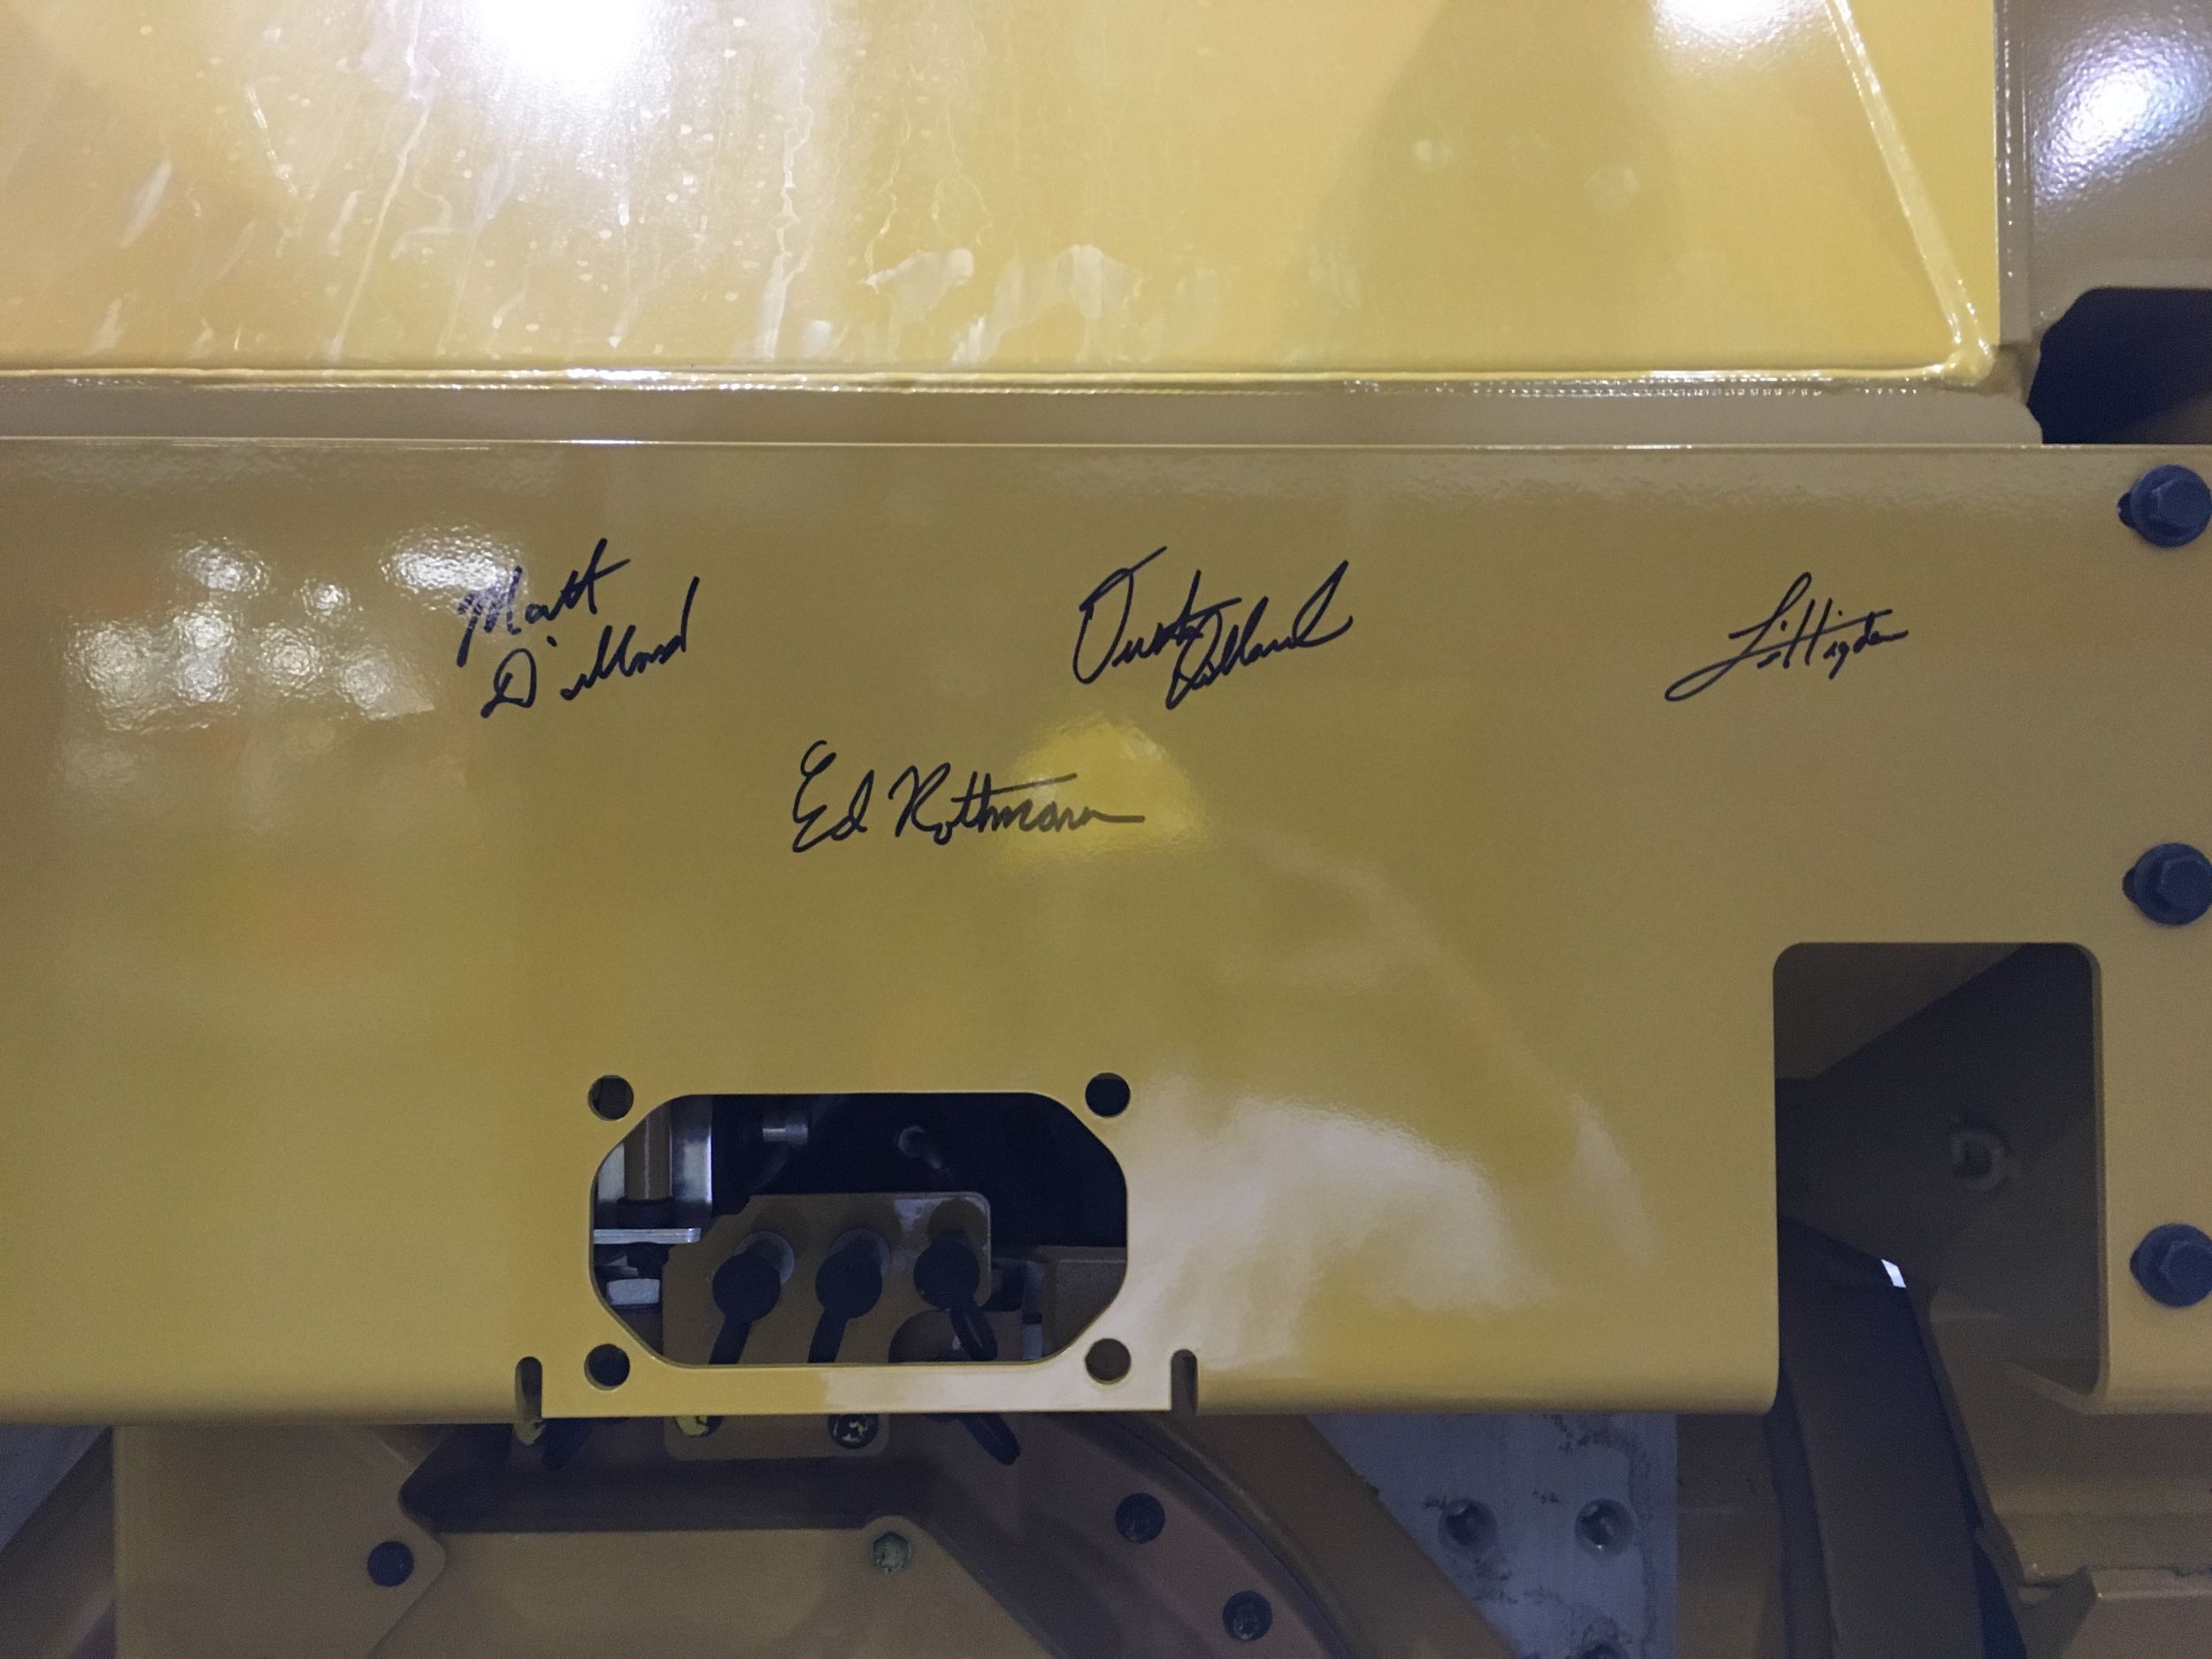 Santek employees commemorated the occasion by signing the D6T that will eventually be added to their fleet.